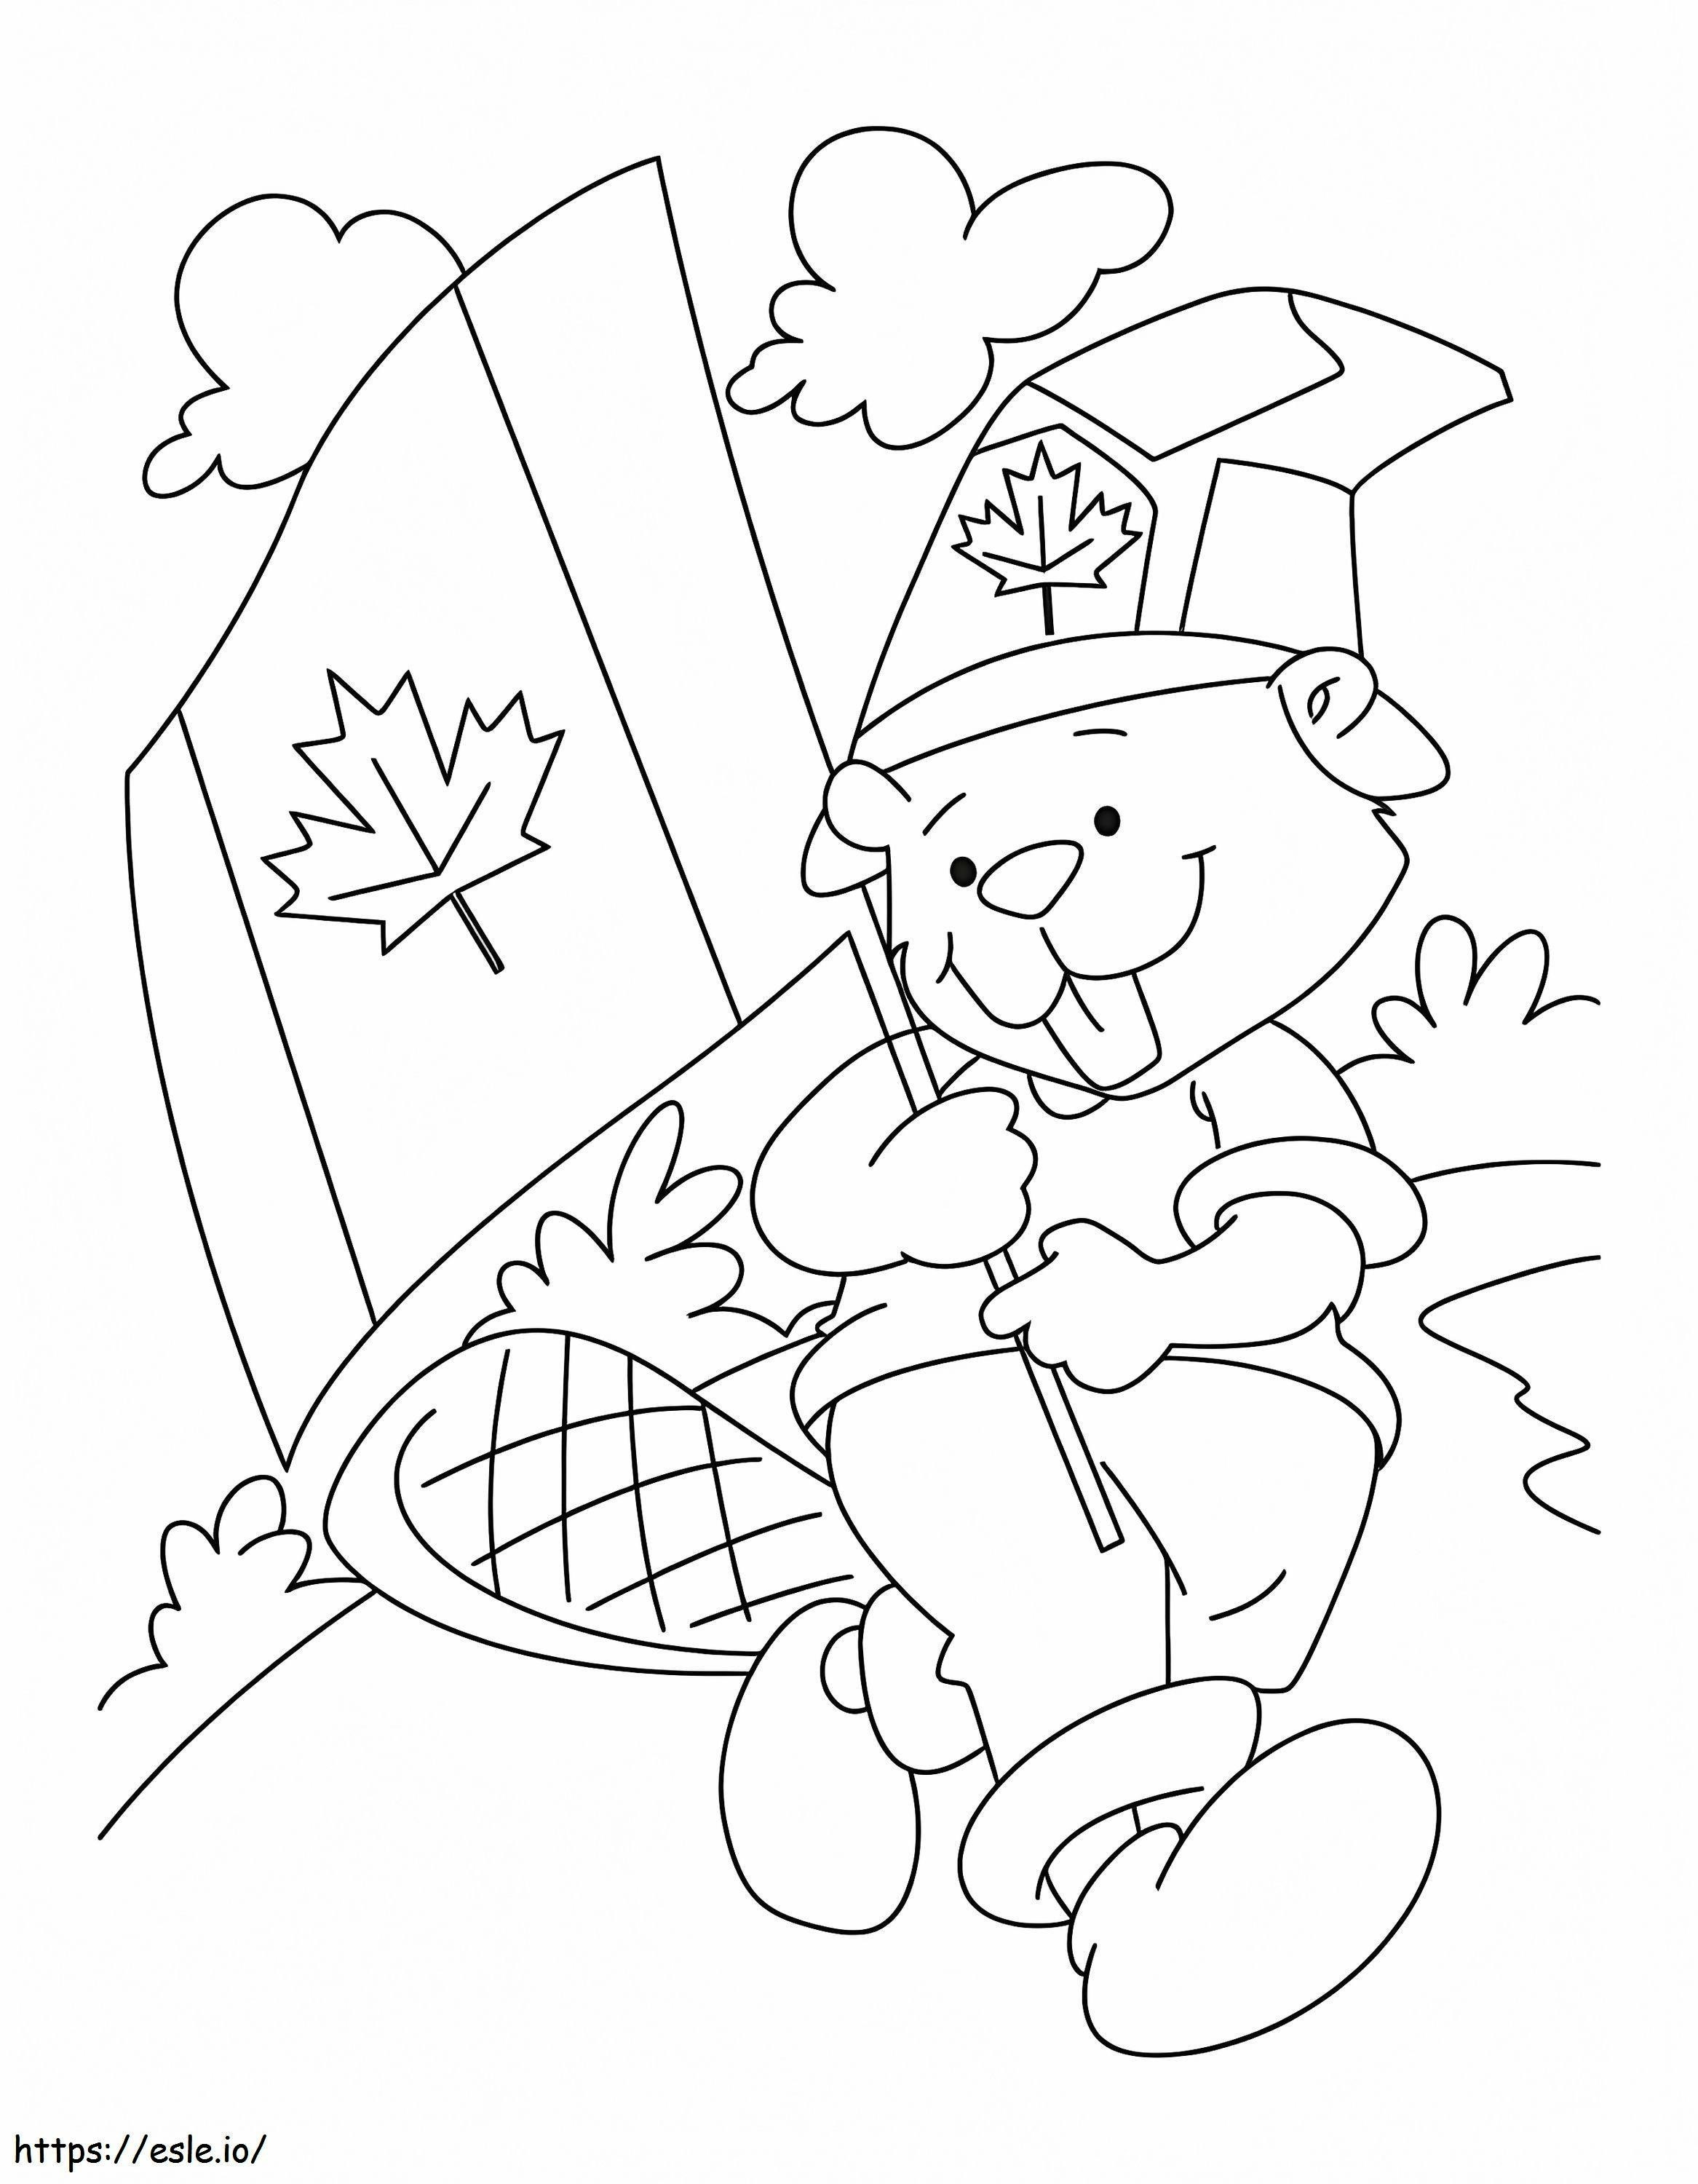 Canada Day 8 coloring page